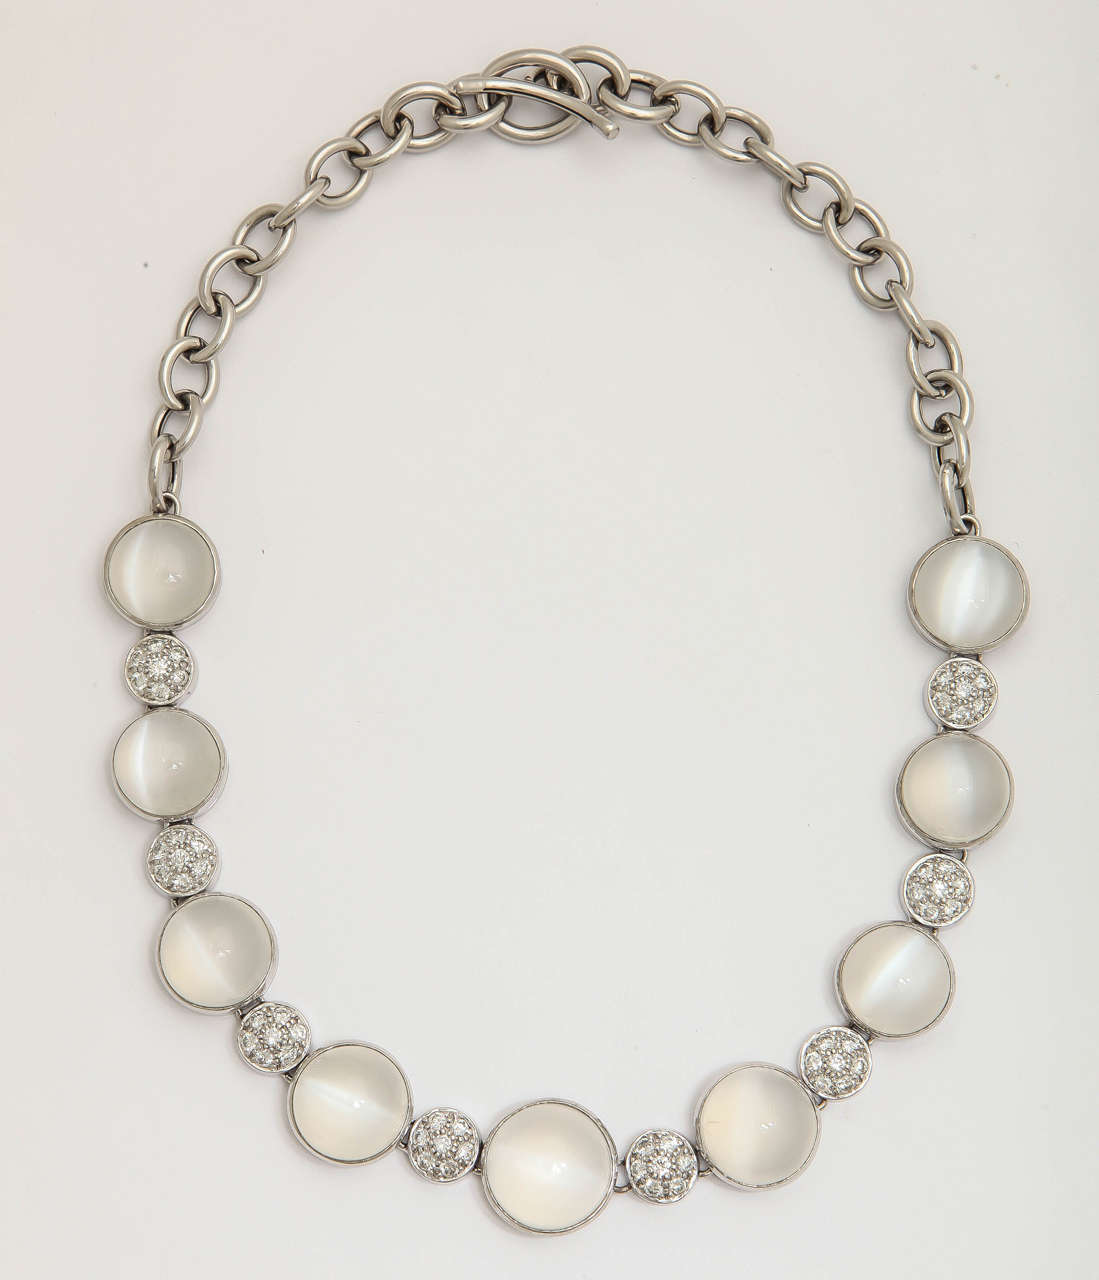 18Kt white gold, moonstone and diamond necklace